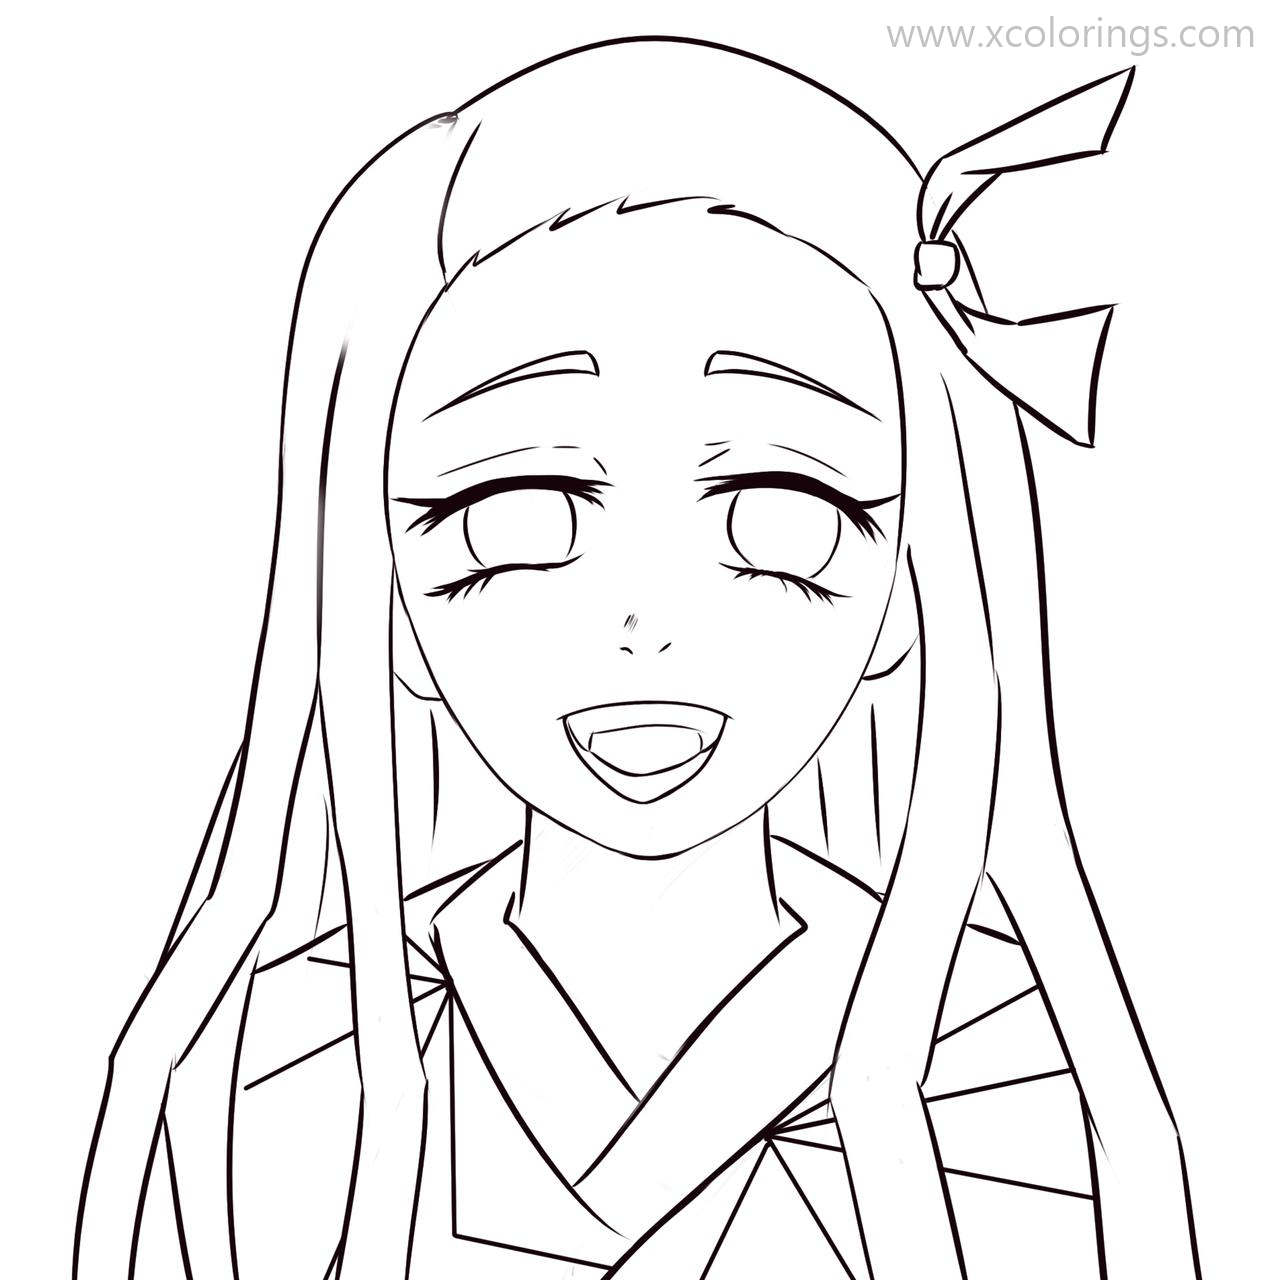 Free Demon Slayer Coloring Pages Nezuko Kamado Lineart by yhernhenry printable